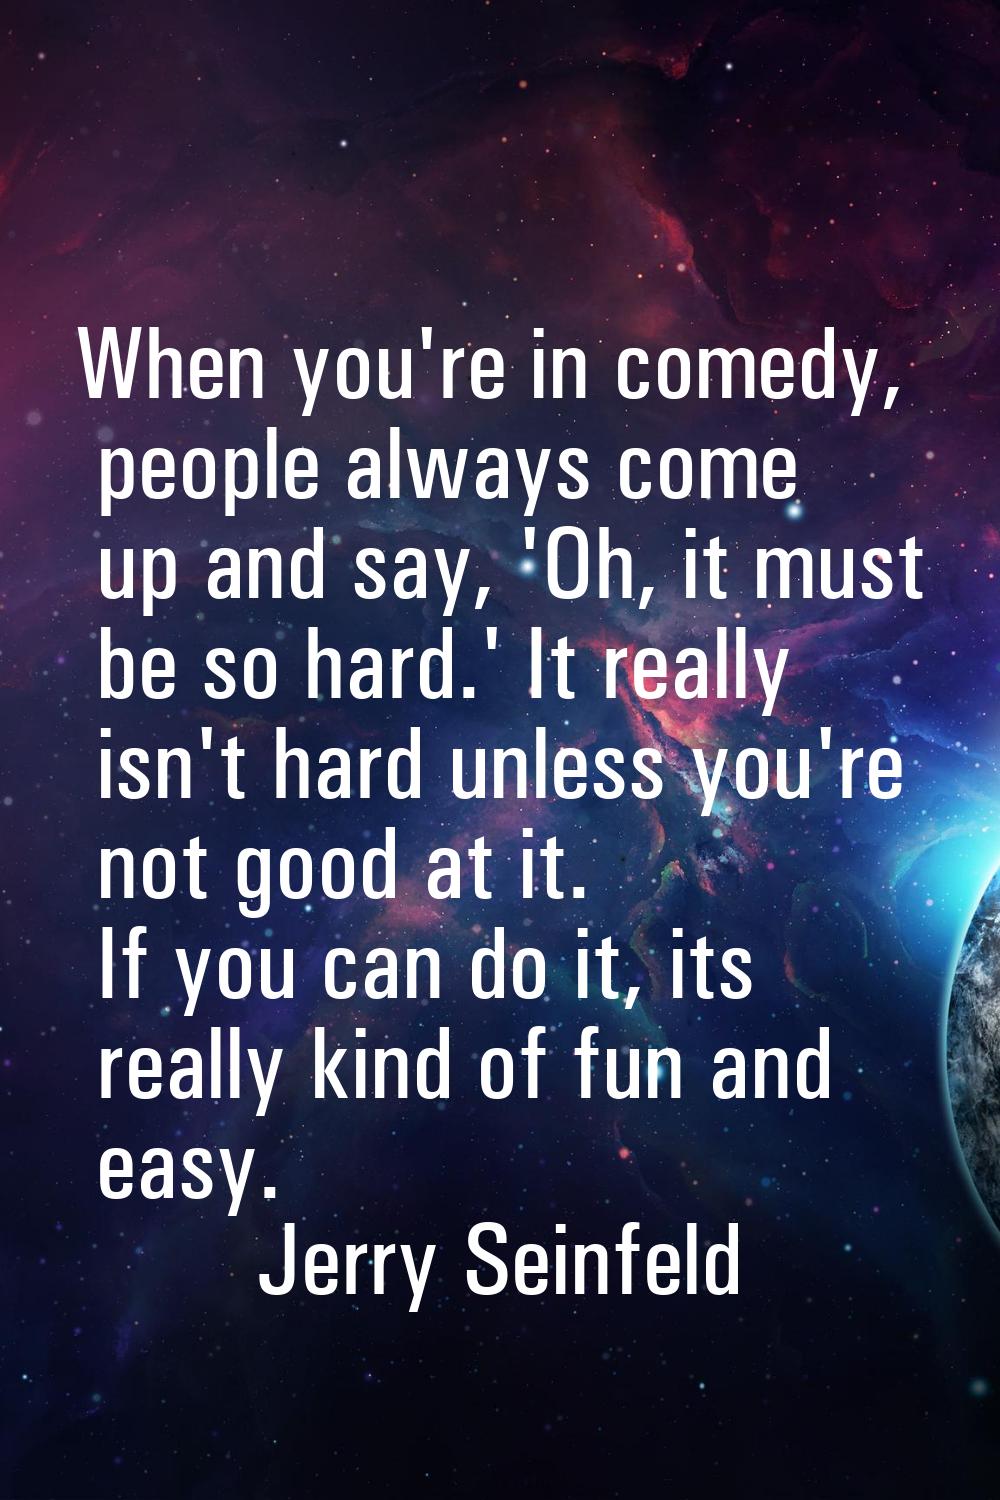 When you're in comedy, people always come up and say, 'Oh, it must be so hard.' It really isn't har